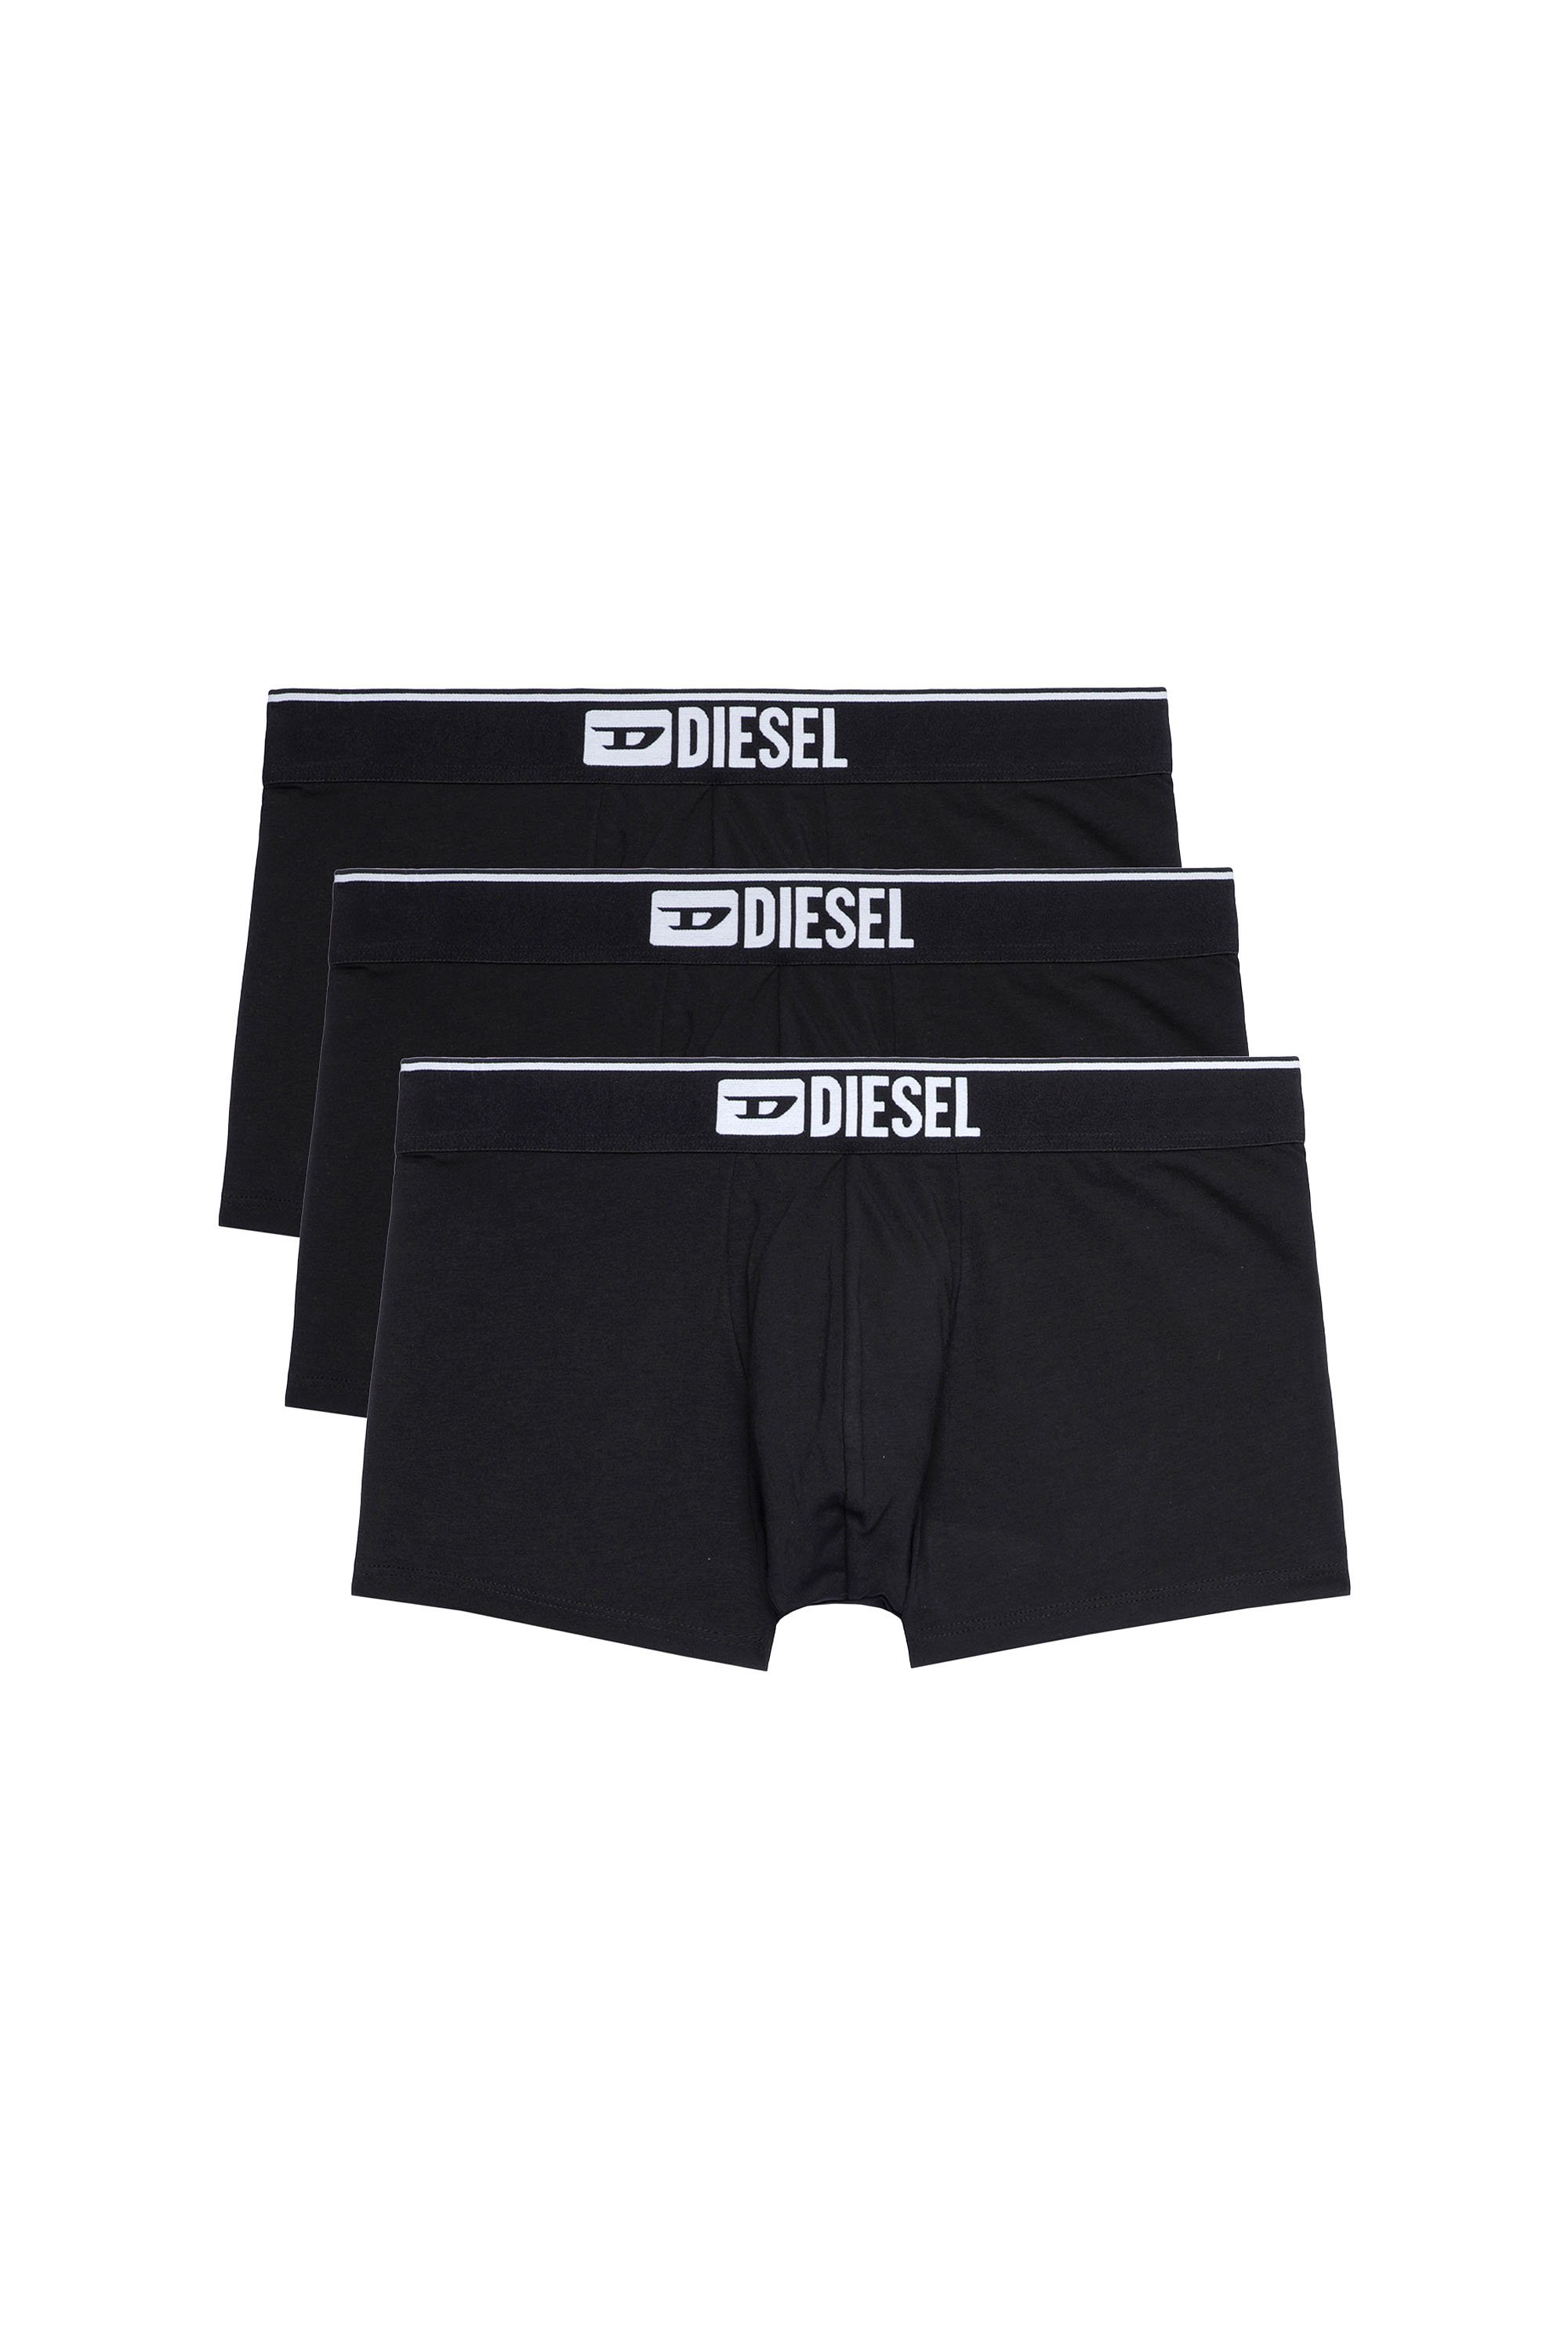 Truhk Pouch Front STP/Packing Boxers, Black - The Tool Shed: An Erotic  Boutique